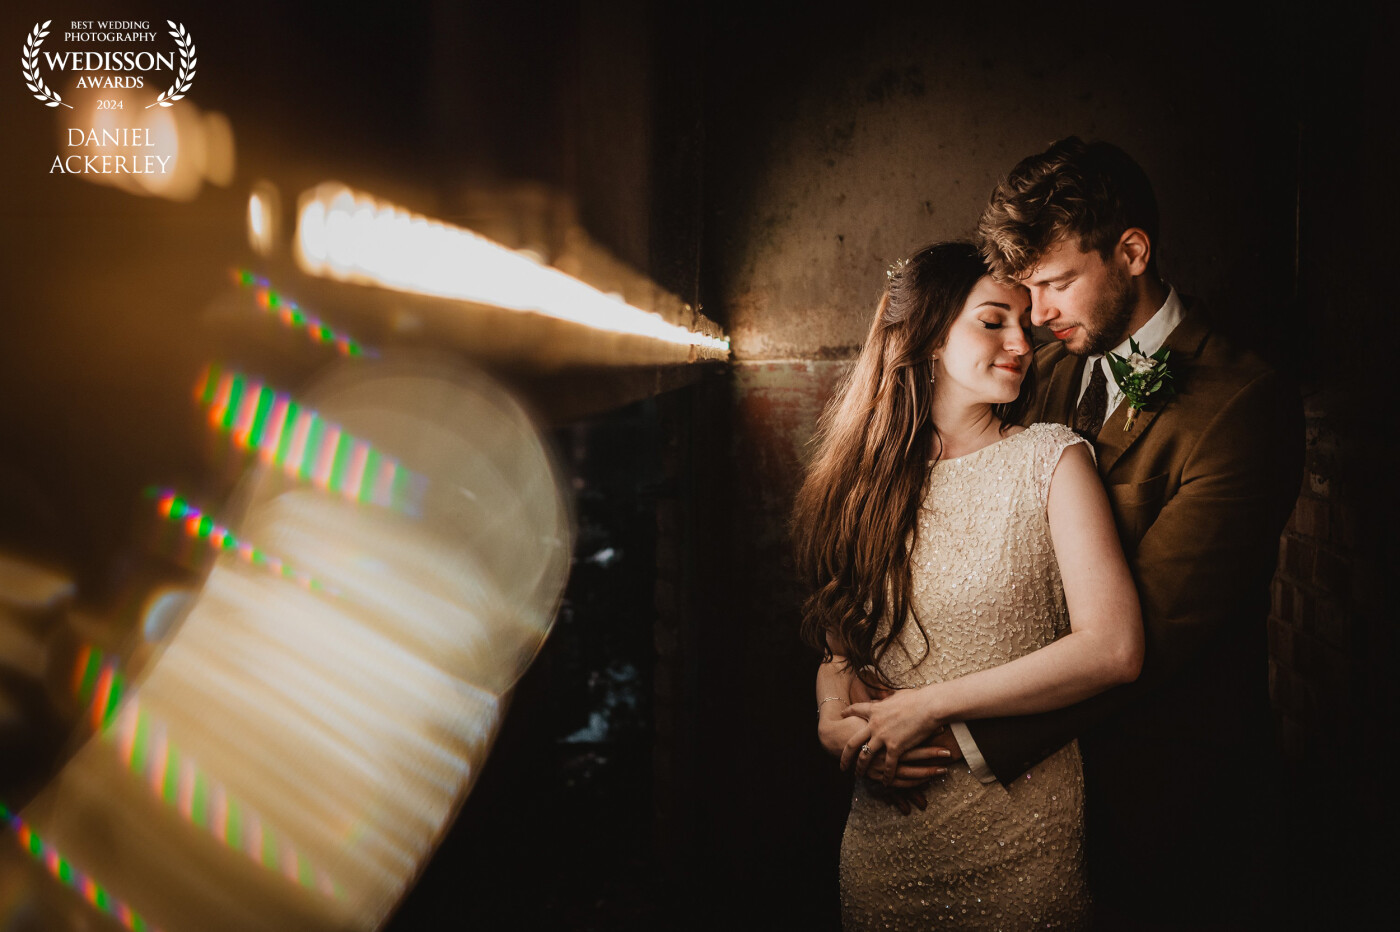 I had noticed that the venue had an outside metal chimney that was lit up internally with led strips, so I asked Ed & Lizzie to stand inside it while I used a prism to create a little light refraction effect, it worked really well and they had a lovely moment.